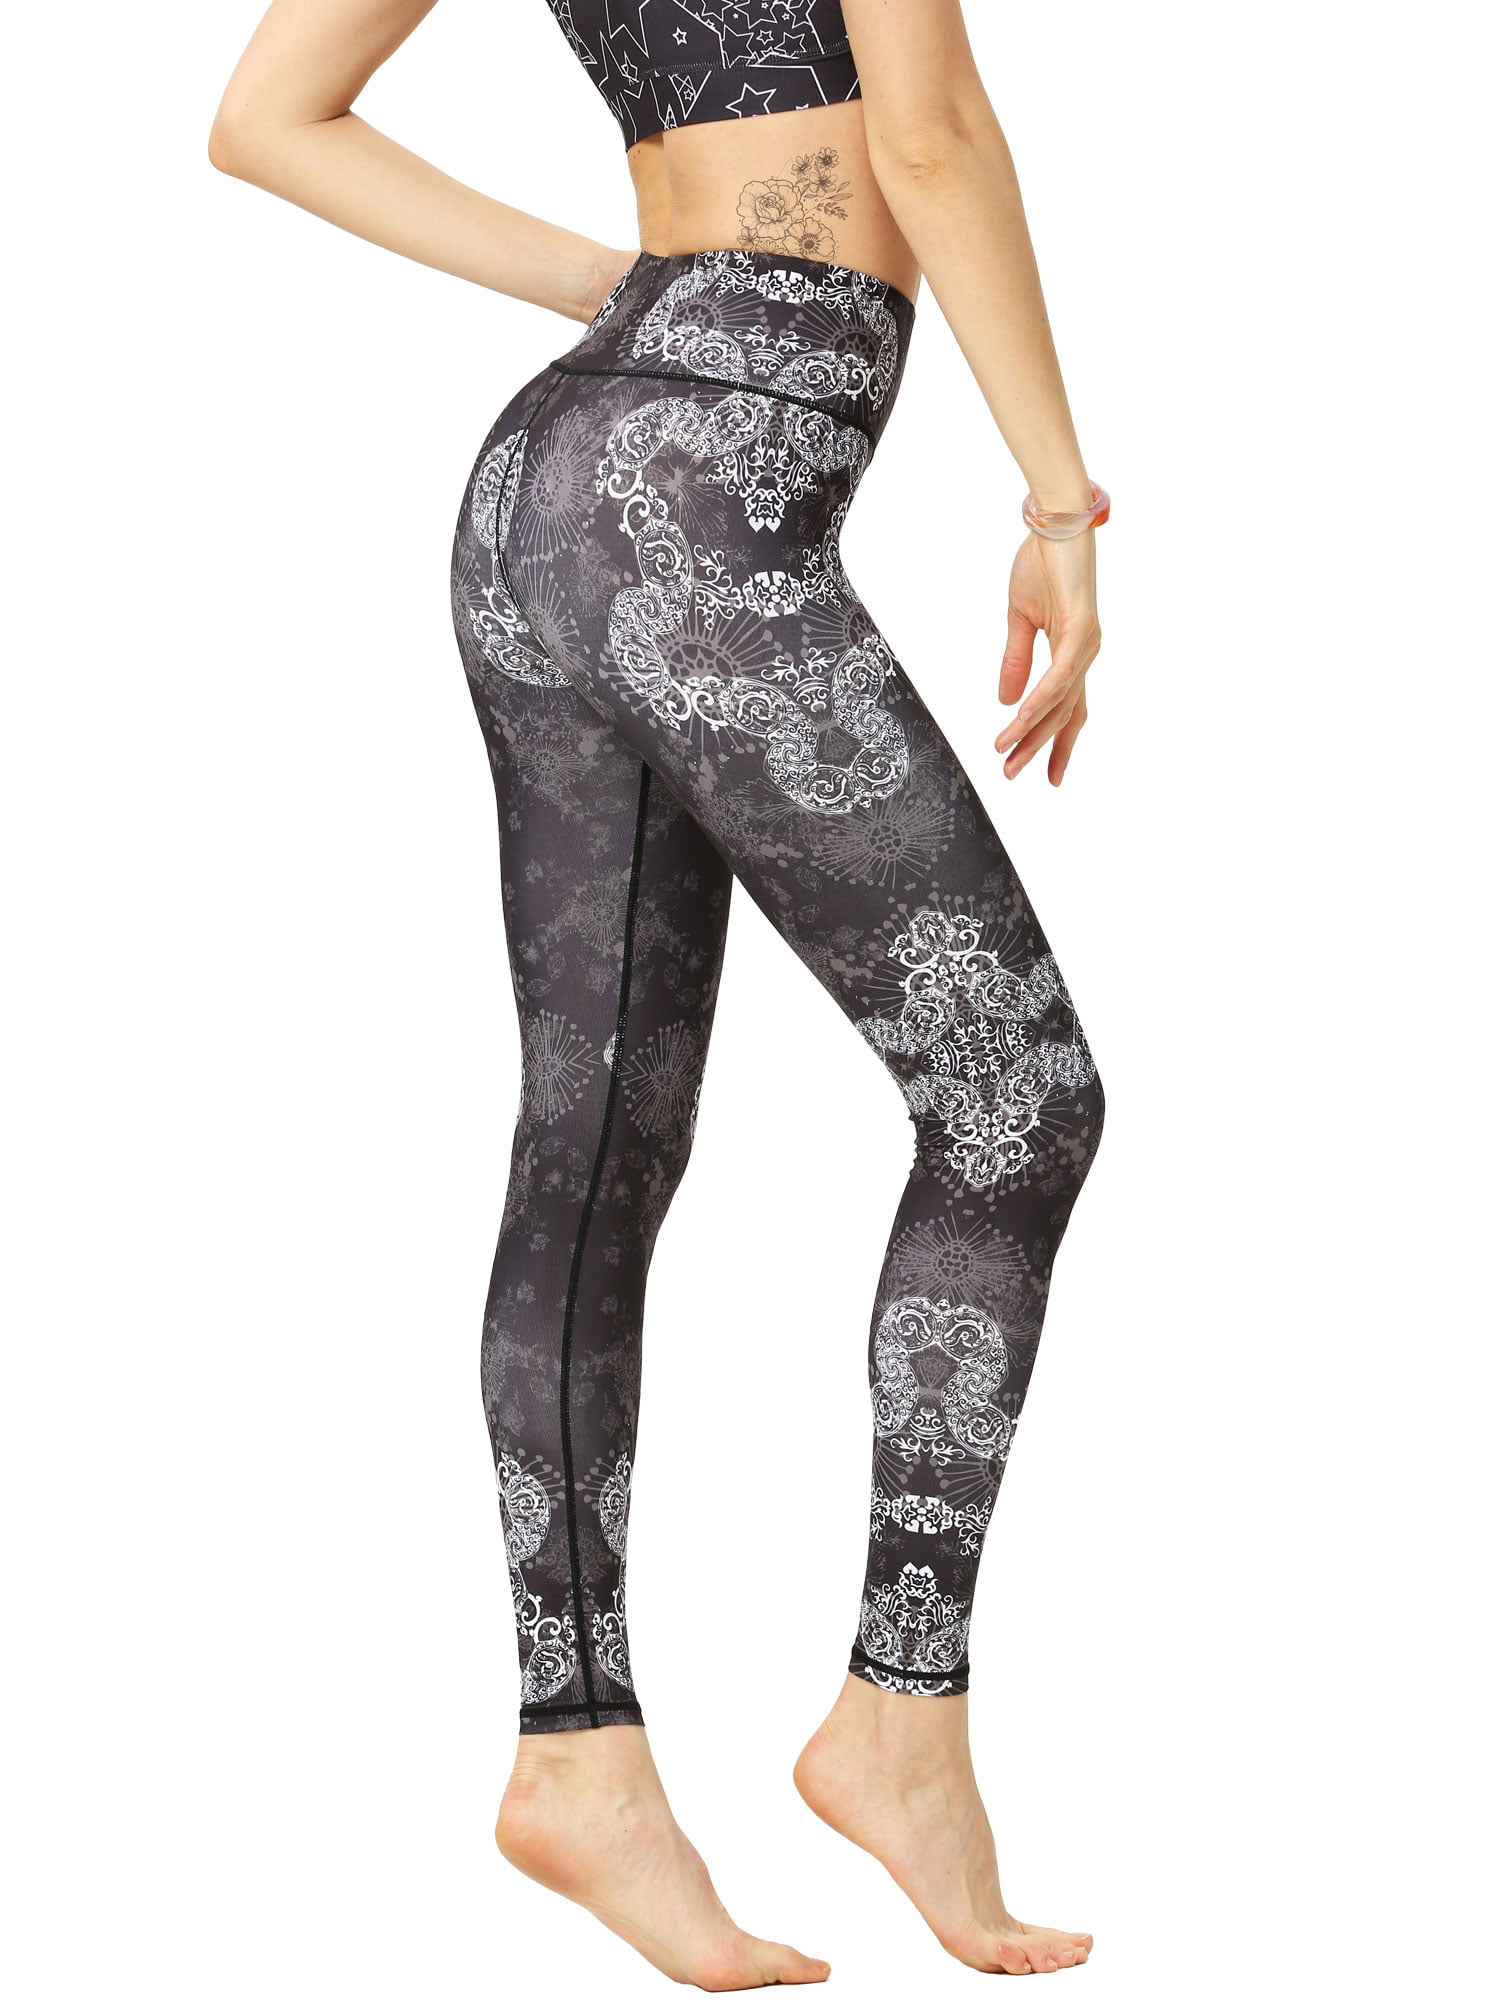 Details about   Women High Waist Printed Yoga Pants Fitness Gym Leggings Workout Sports Trousers 